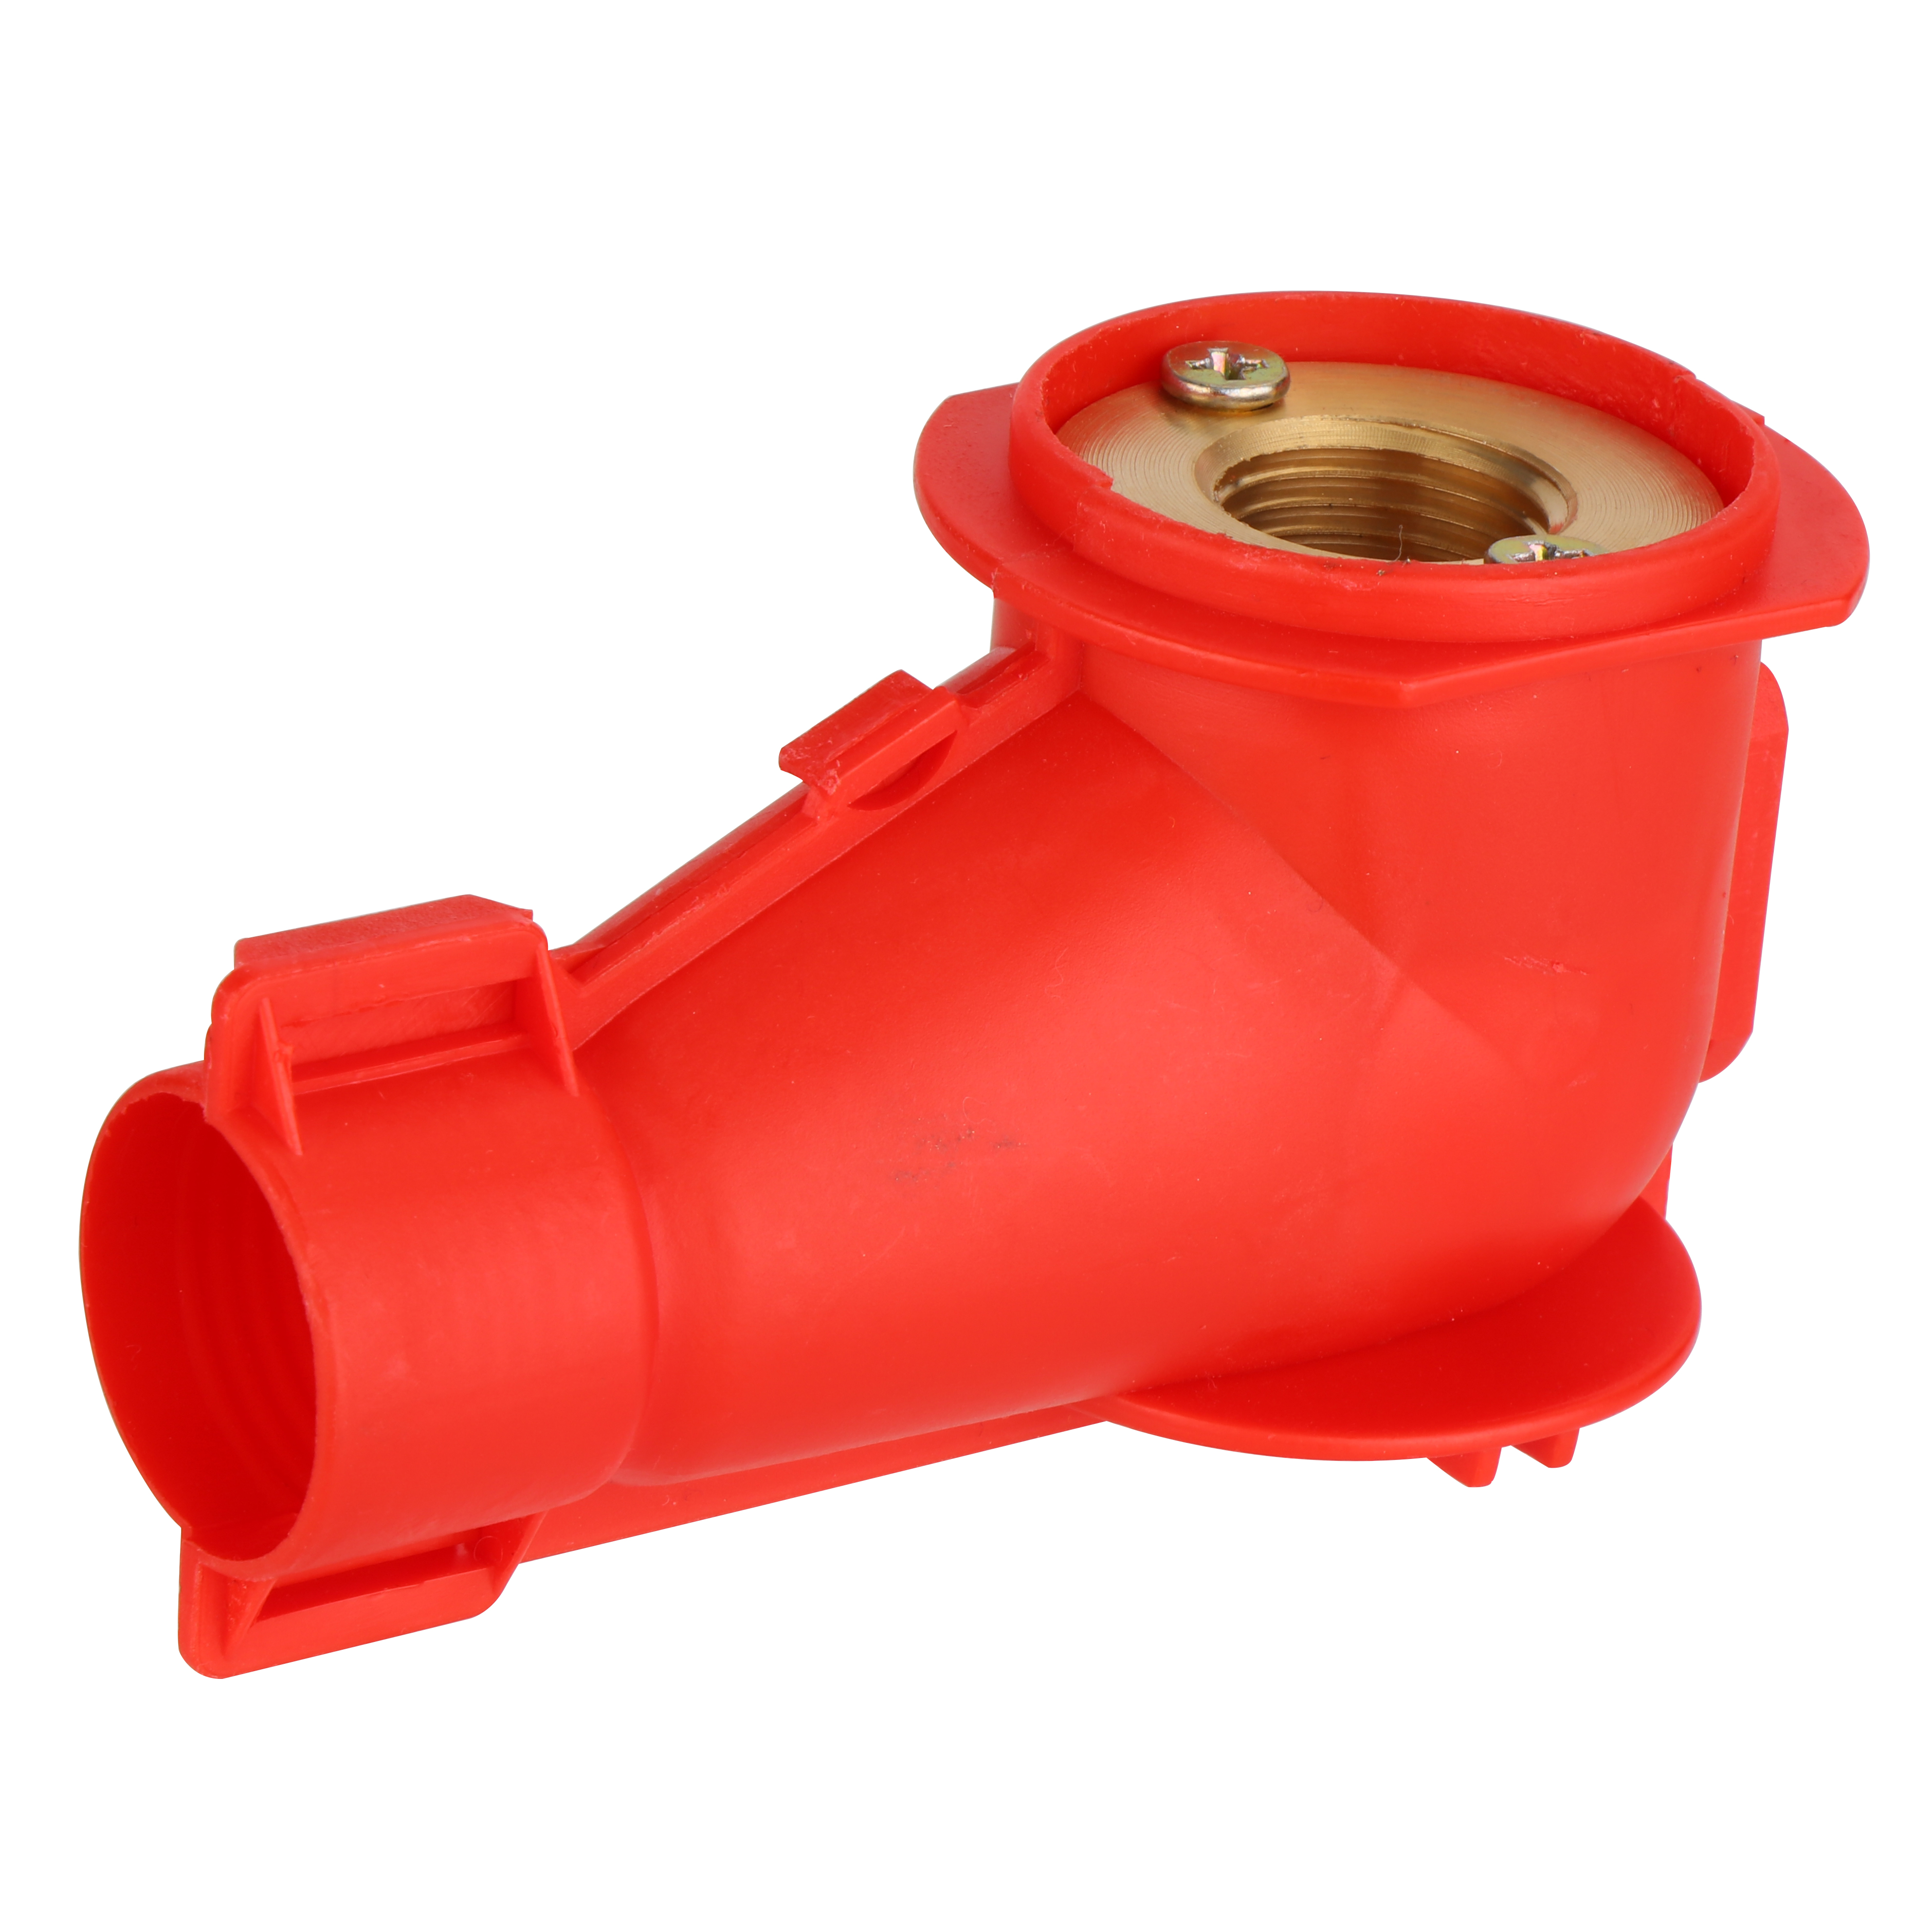 ZS600-1012: Brass Pex Female Elbow With Plastic Cover 